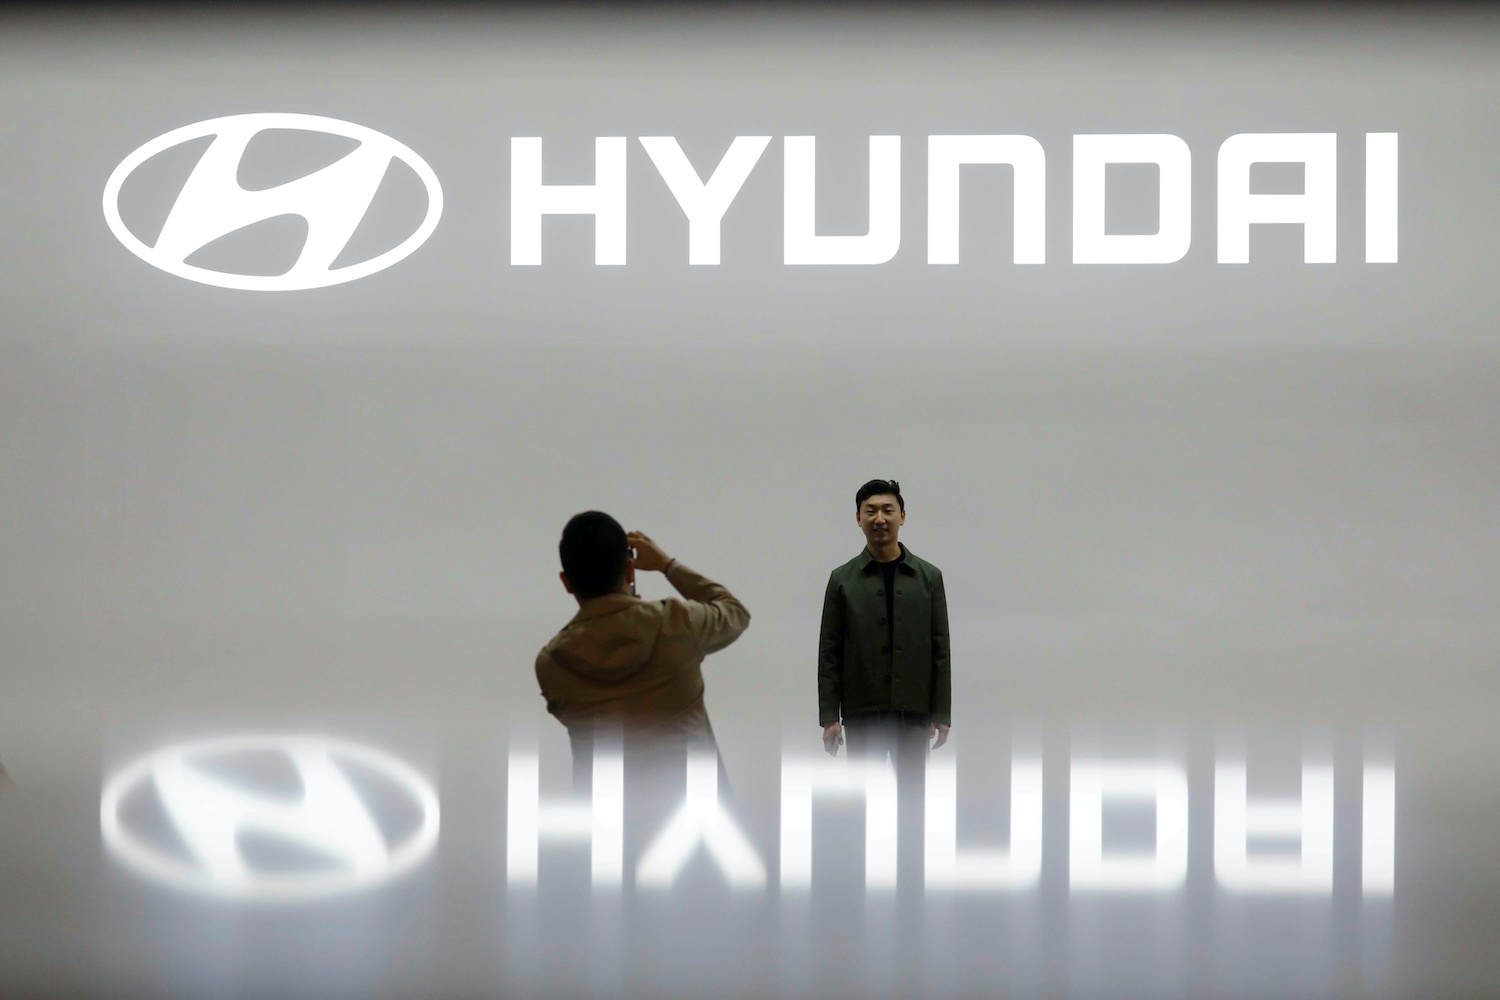 Hyundai Capital America submitted inaccurate payment information to credit reporting agencies for years, damaging consumers' credit ratings.